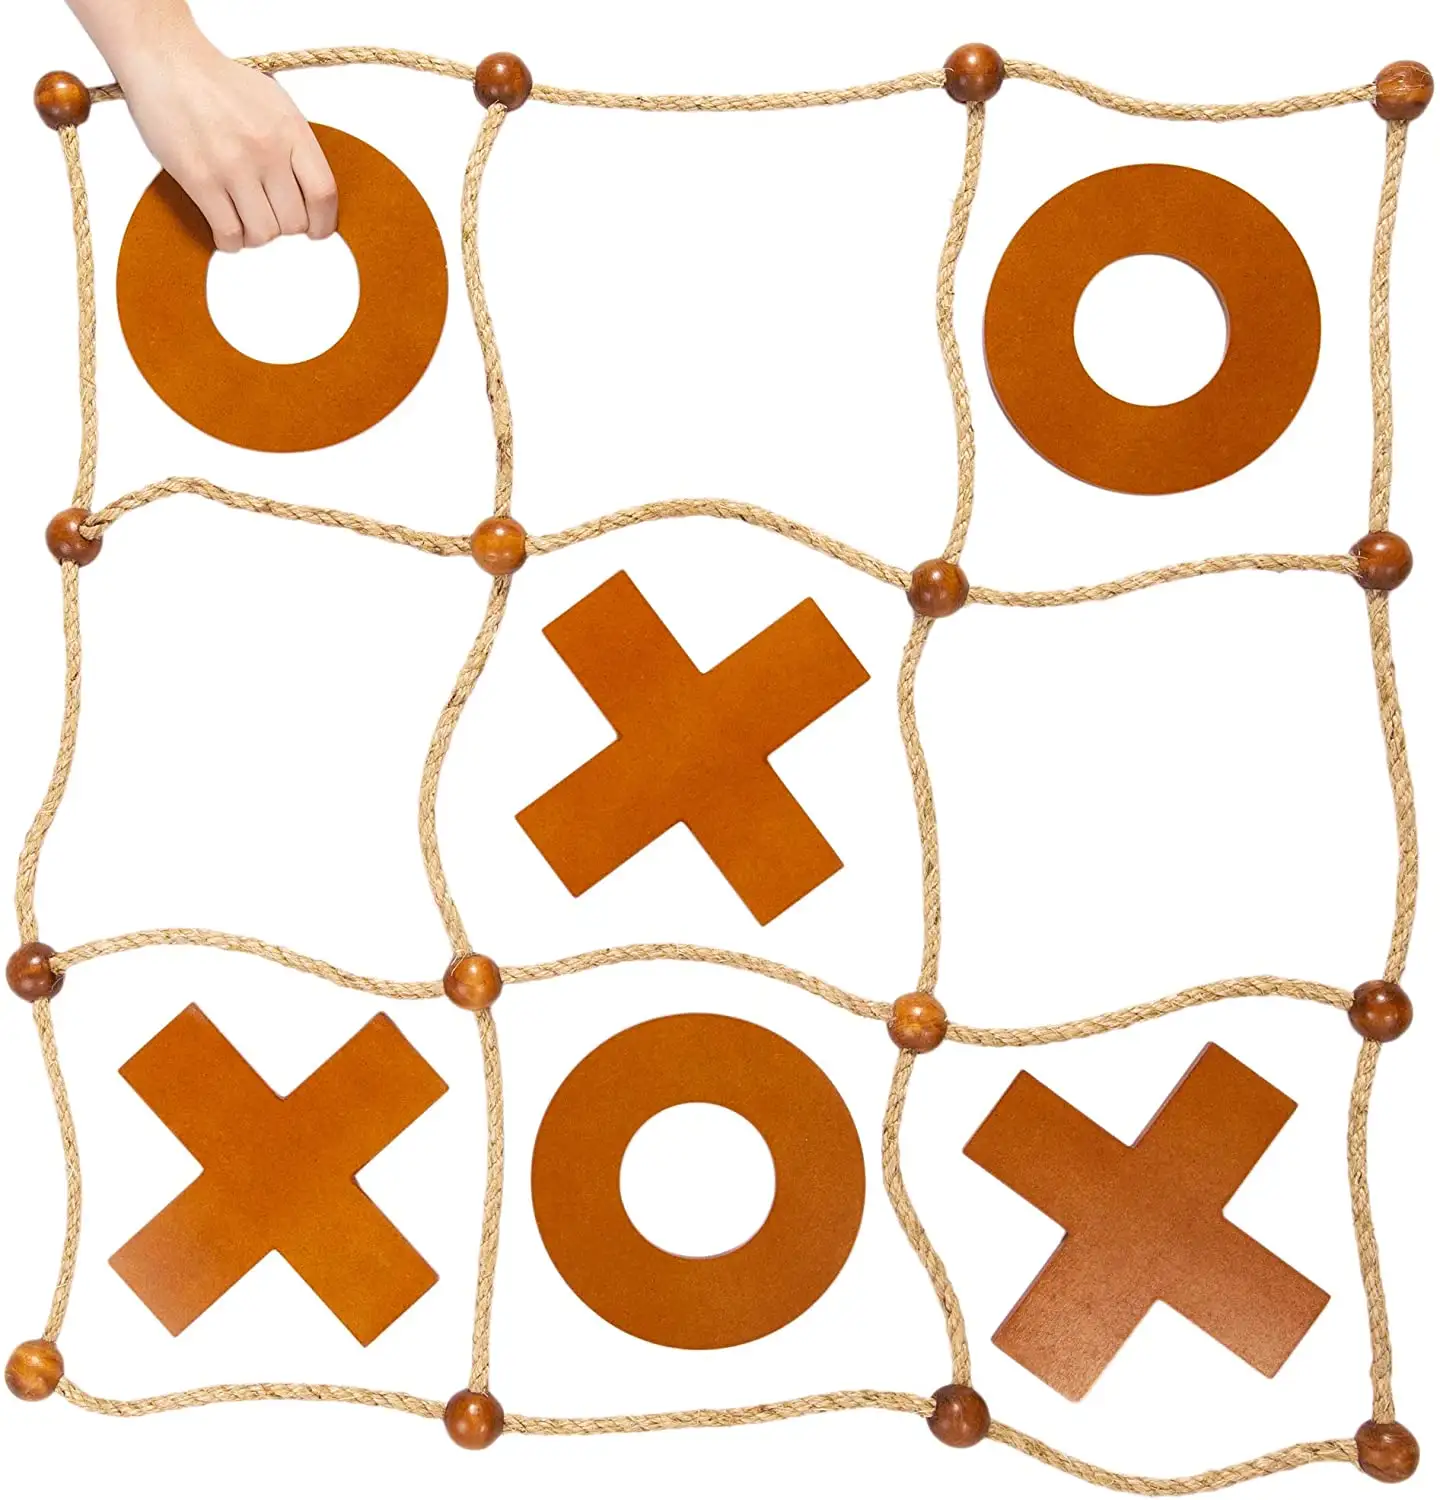 Outdoor Yard Game Wooden Tic Tac Toe Game Big Wood Noughts and Crosses with Rope Game for Kids and Adults